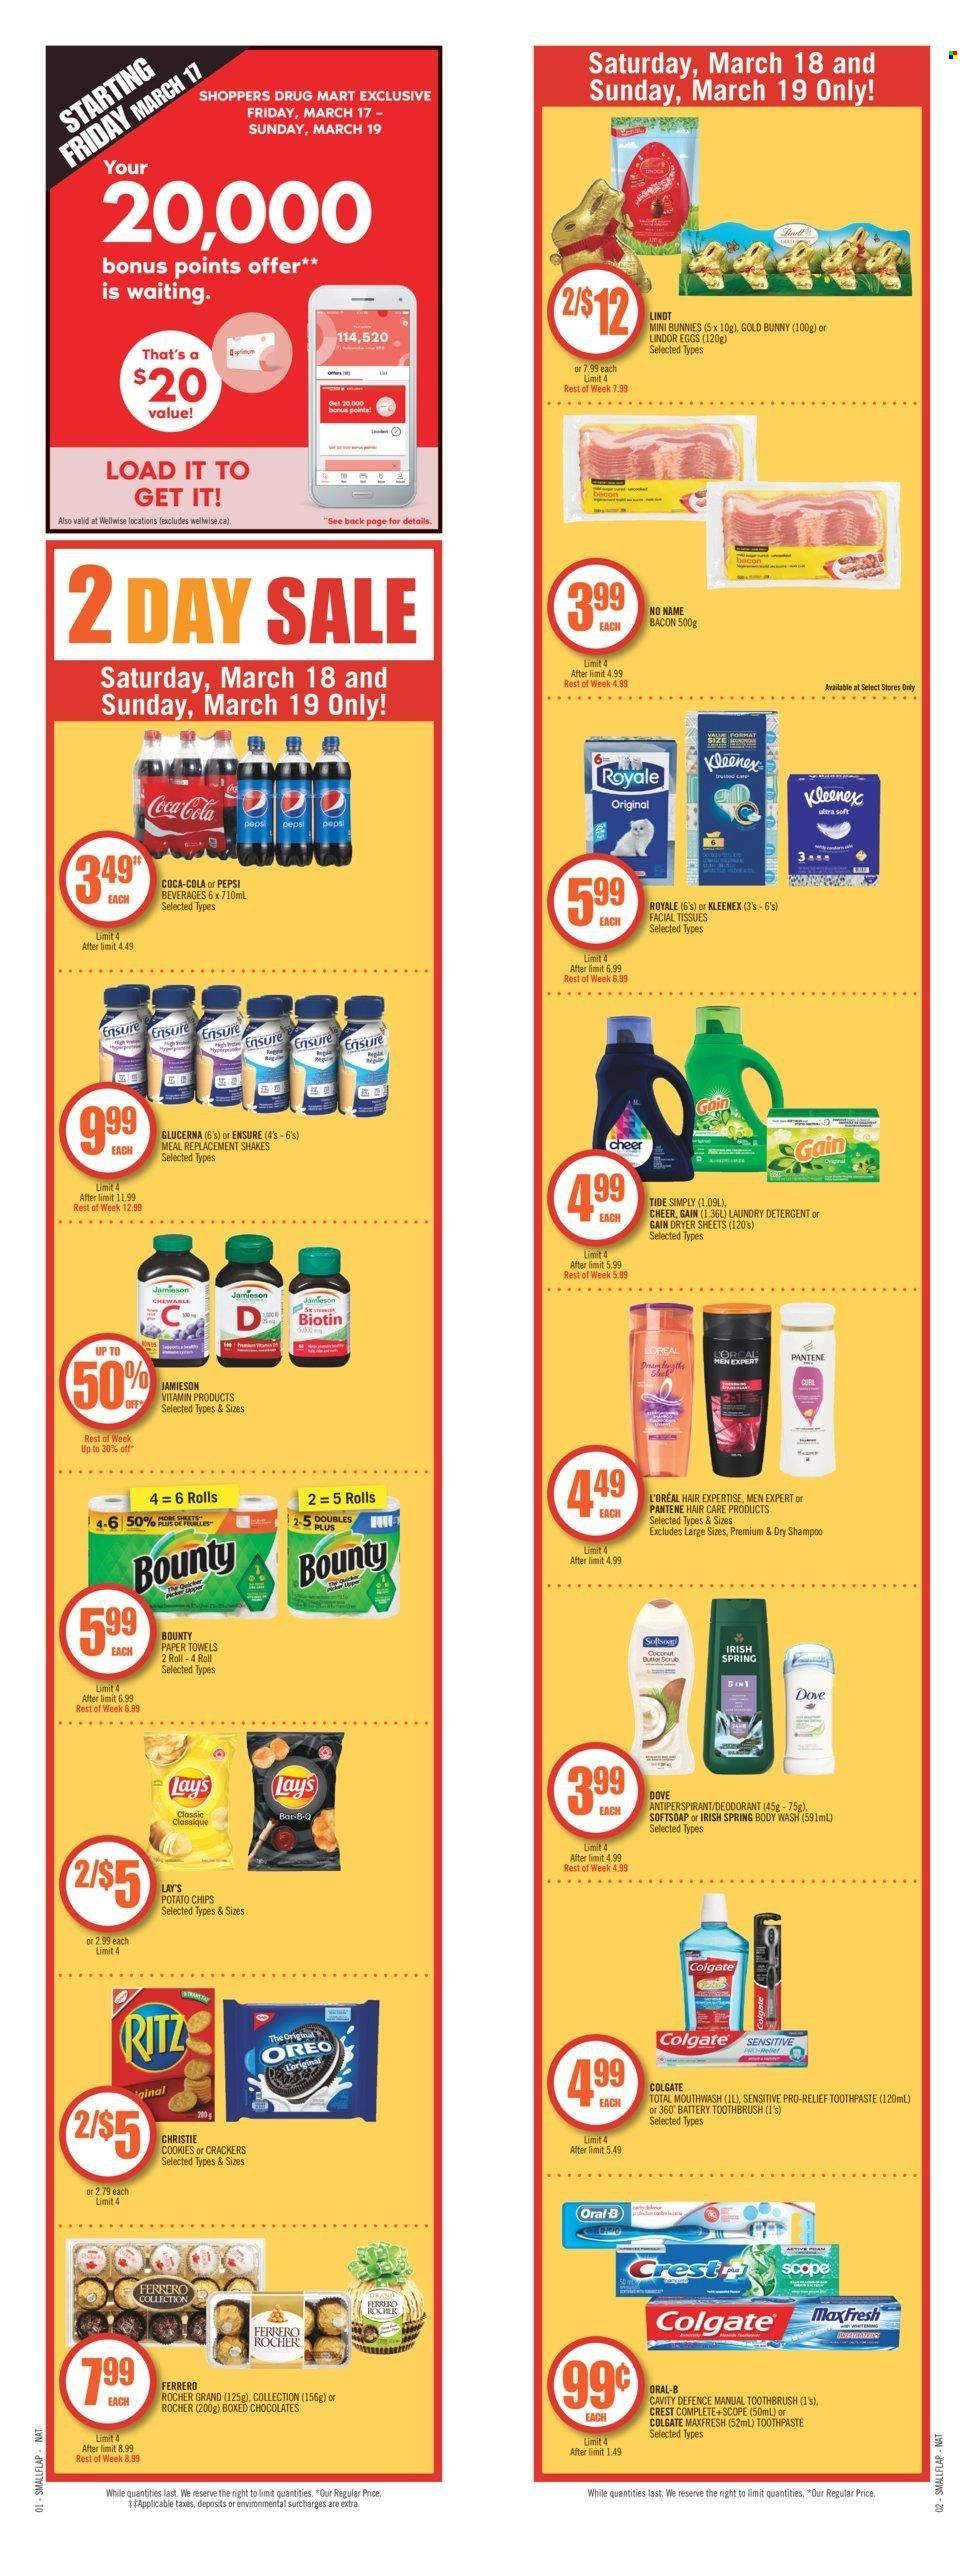 thumbnail - Shoppers Drug Mart Flyer - March 18, 2023 - March 23, 2023 - Sales products - No Name, bacon, shake, eggs, cookies, Dove, chocolate, Bounty, crackers, RITZ, potato chips, chips, Lay’s, Coca-Cola, Pepsi, Kleenex, tissues, kitchen towels, paper towels, Gain, Tide, laundry detergent, dryer sheets, body wash, Softsoap, toothbrush, toothpaste, mouthwash, Crest, facial tissues, L’Oréal, Pantene, anti-perspirant, battery, Biotin, Glucerna, detergent, Colgate, shampoo, Oreo, Oral-B, Lindt, Lindor, Ferrero Rocher, deodorant. Page 15.